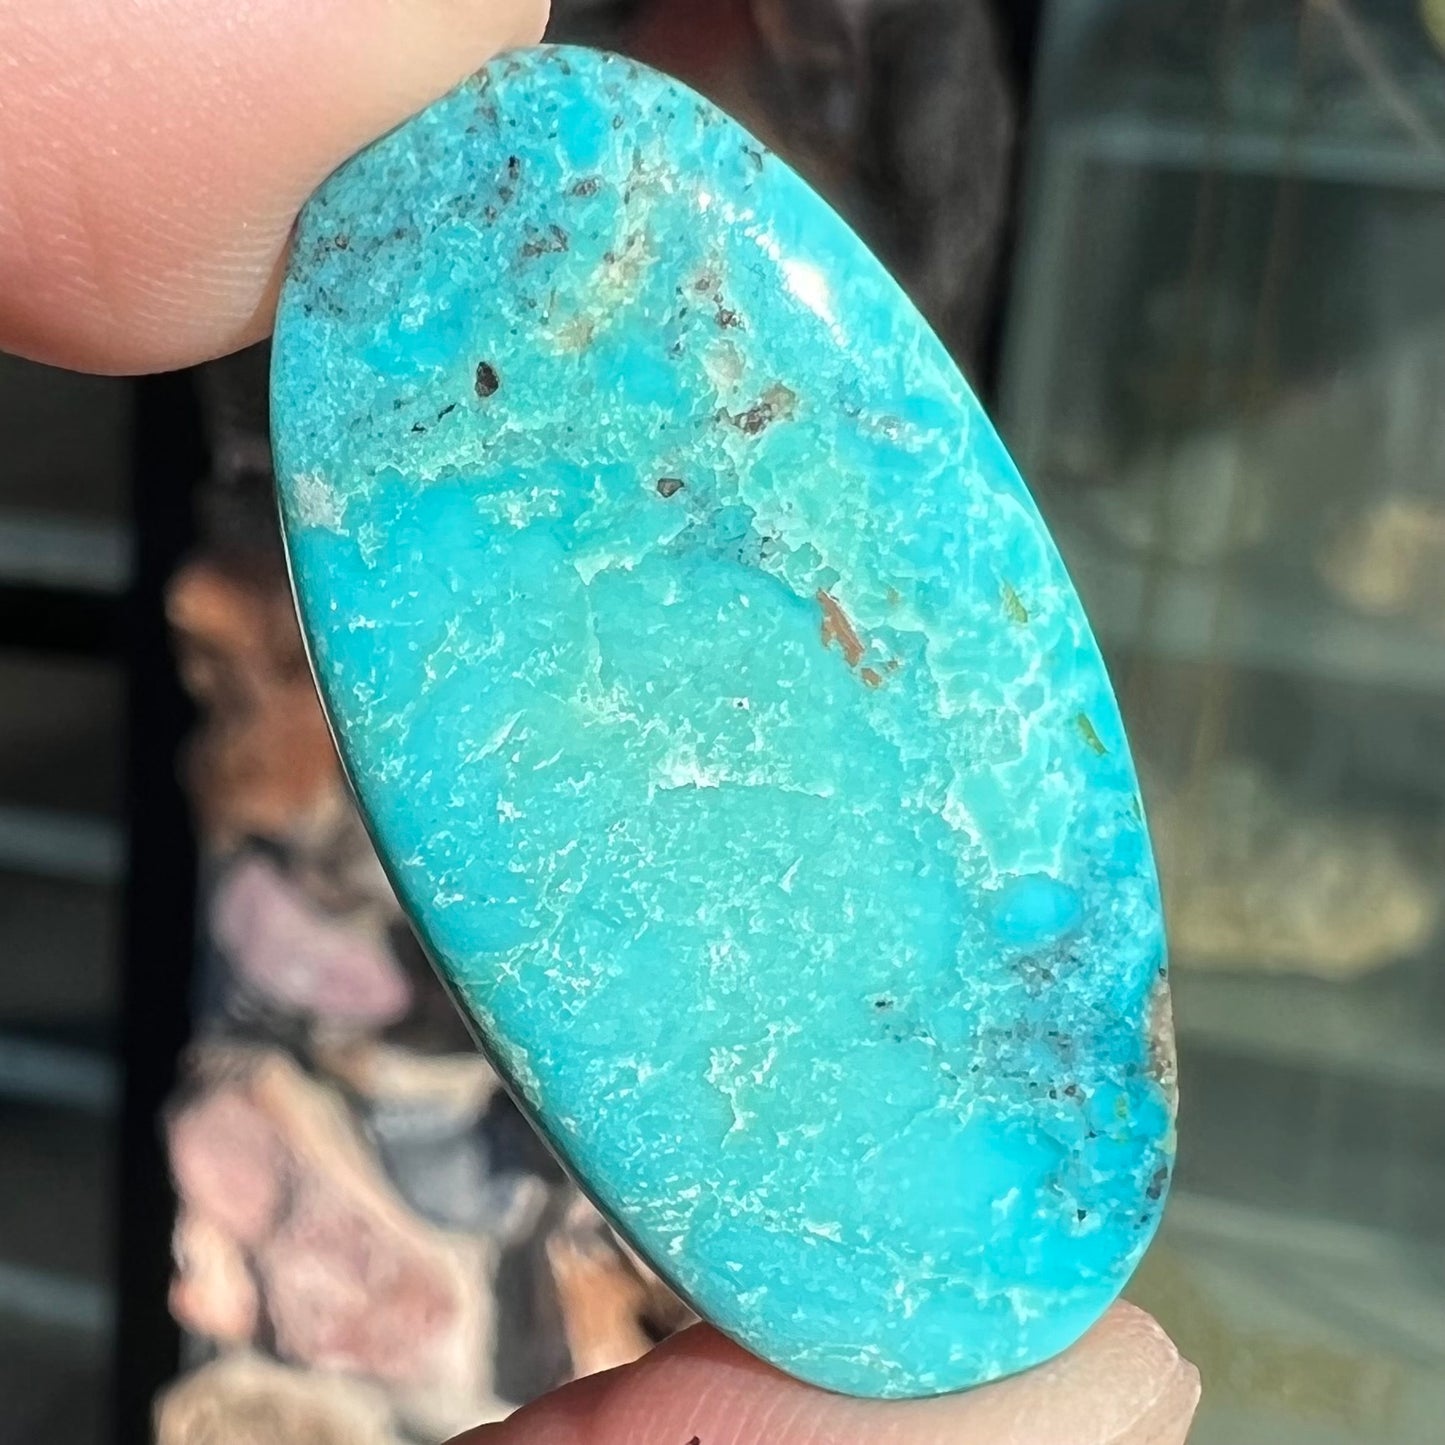 One loose oval cut blue turquoise stone from Bisbee, Arizona.